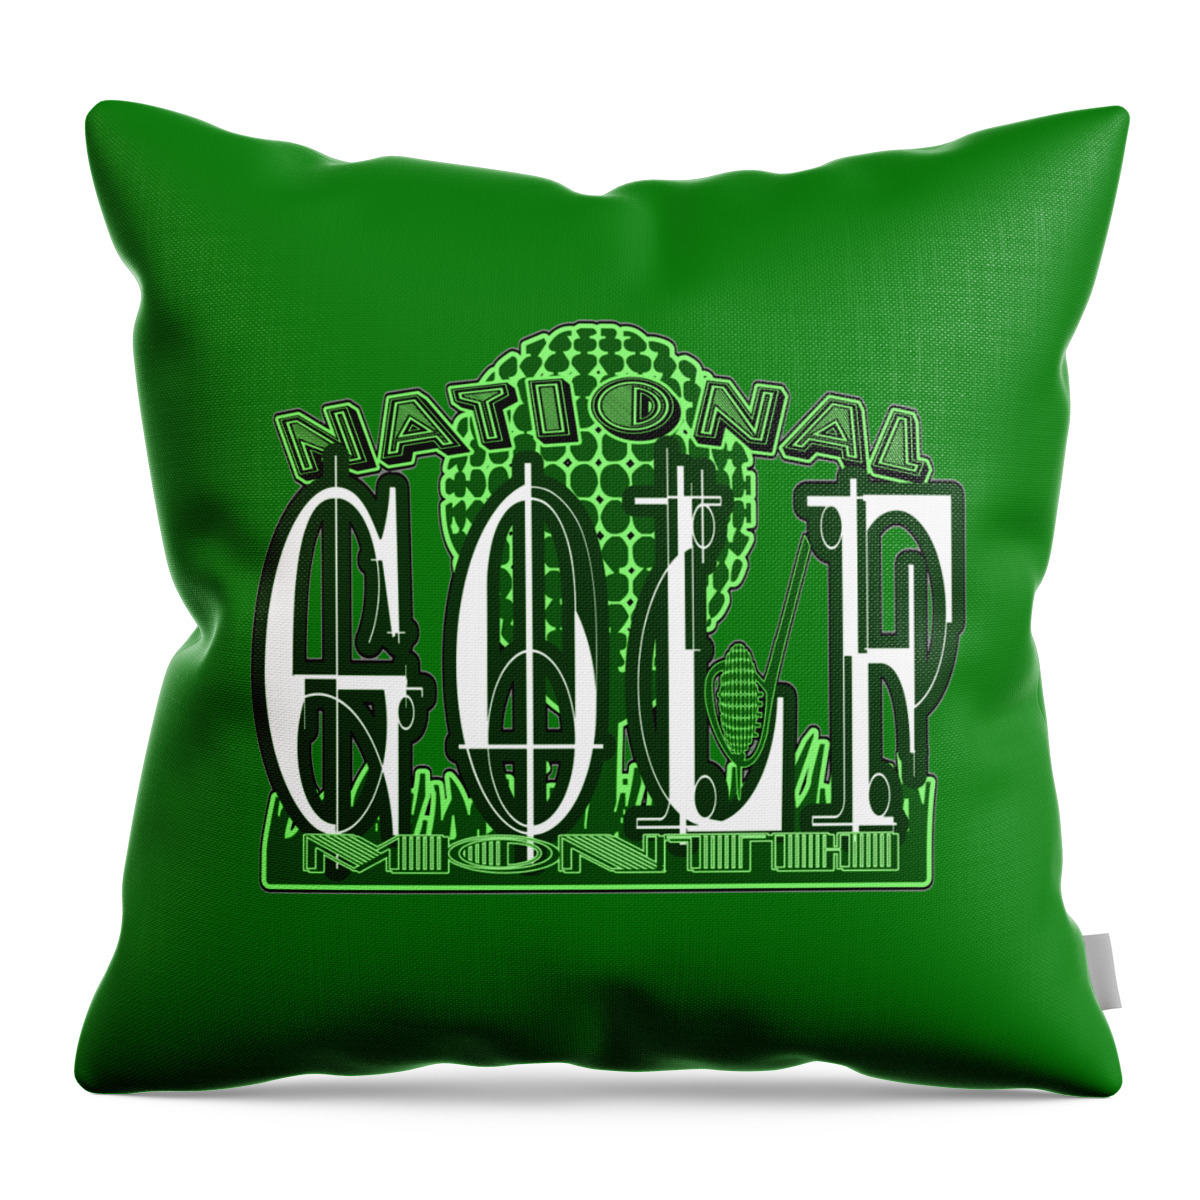 August Throw Pillow featuring the digital art August is National Golf Month by Delynn Addams